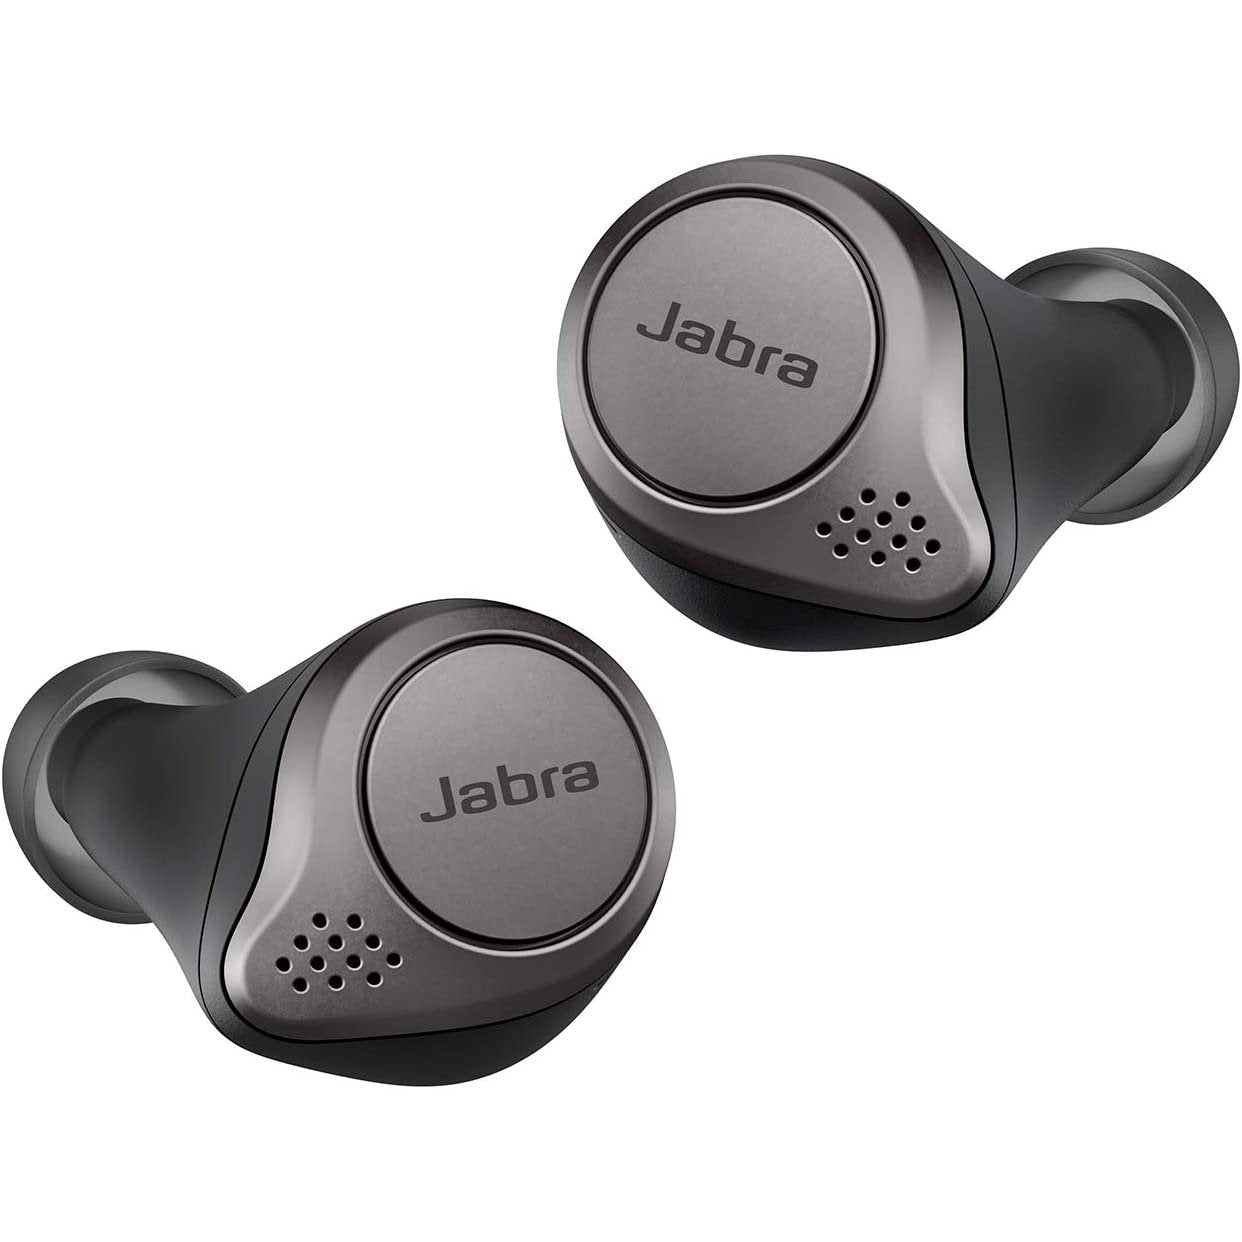 Jabra plans improved wind and conversation cancelation with